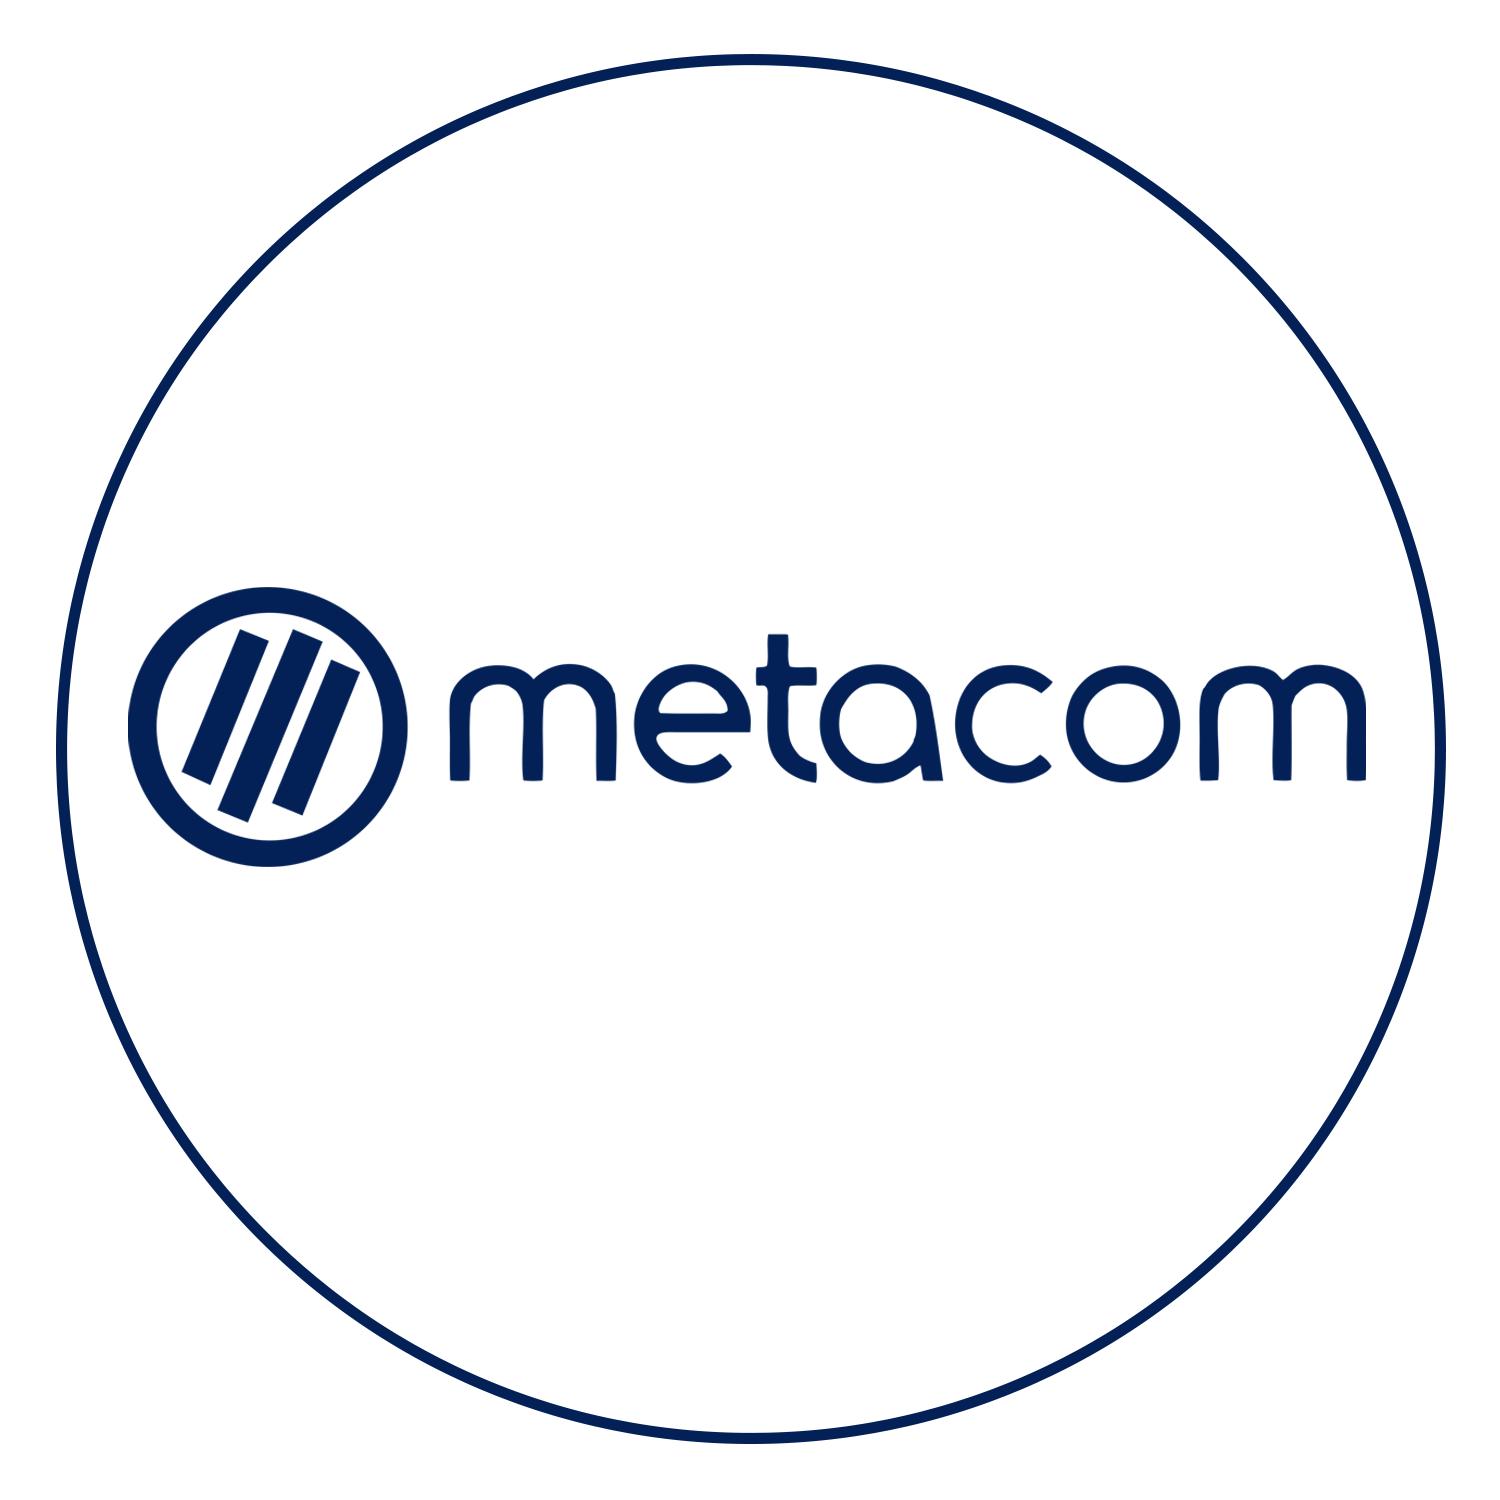 Metacom Business Process Outsourcing Soulutions